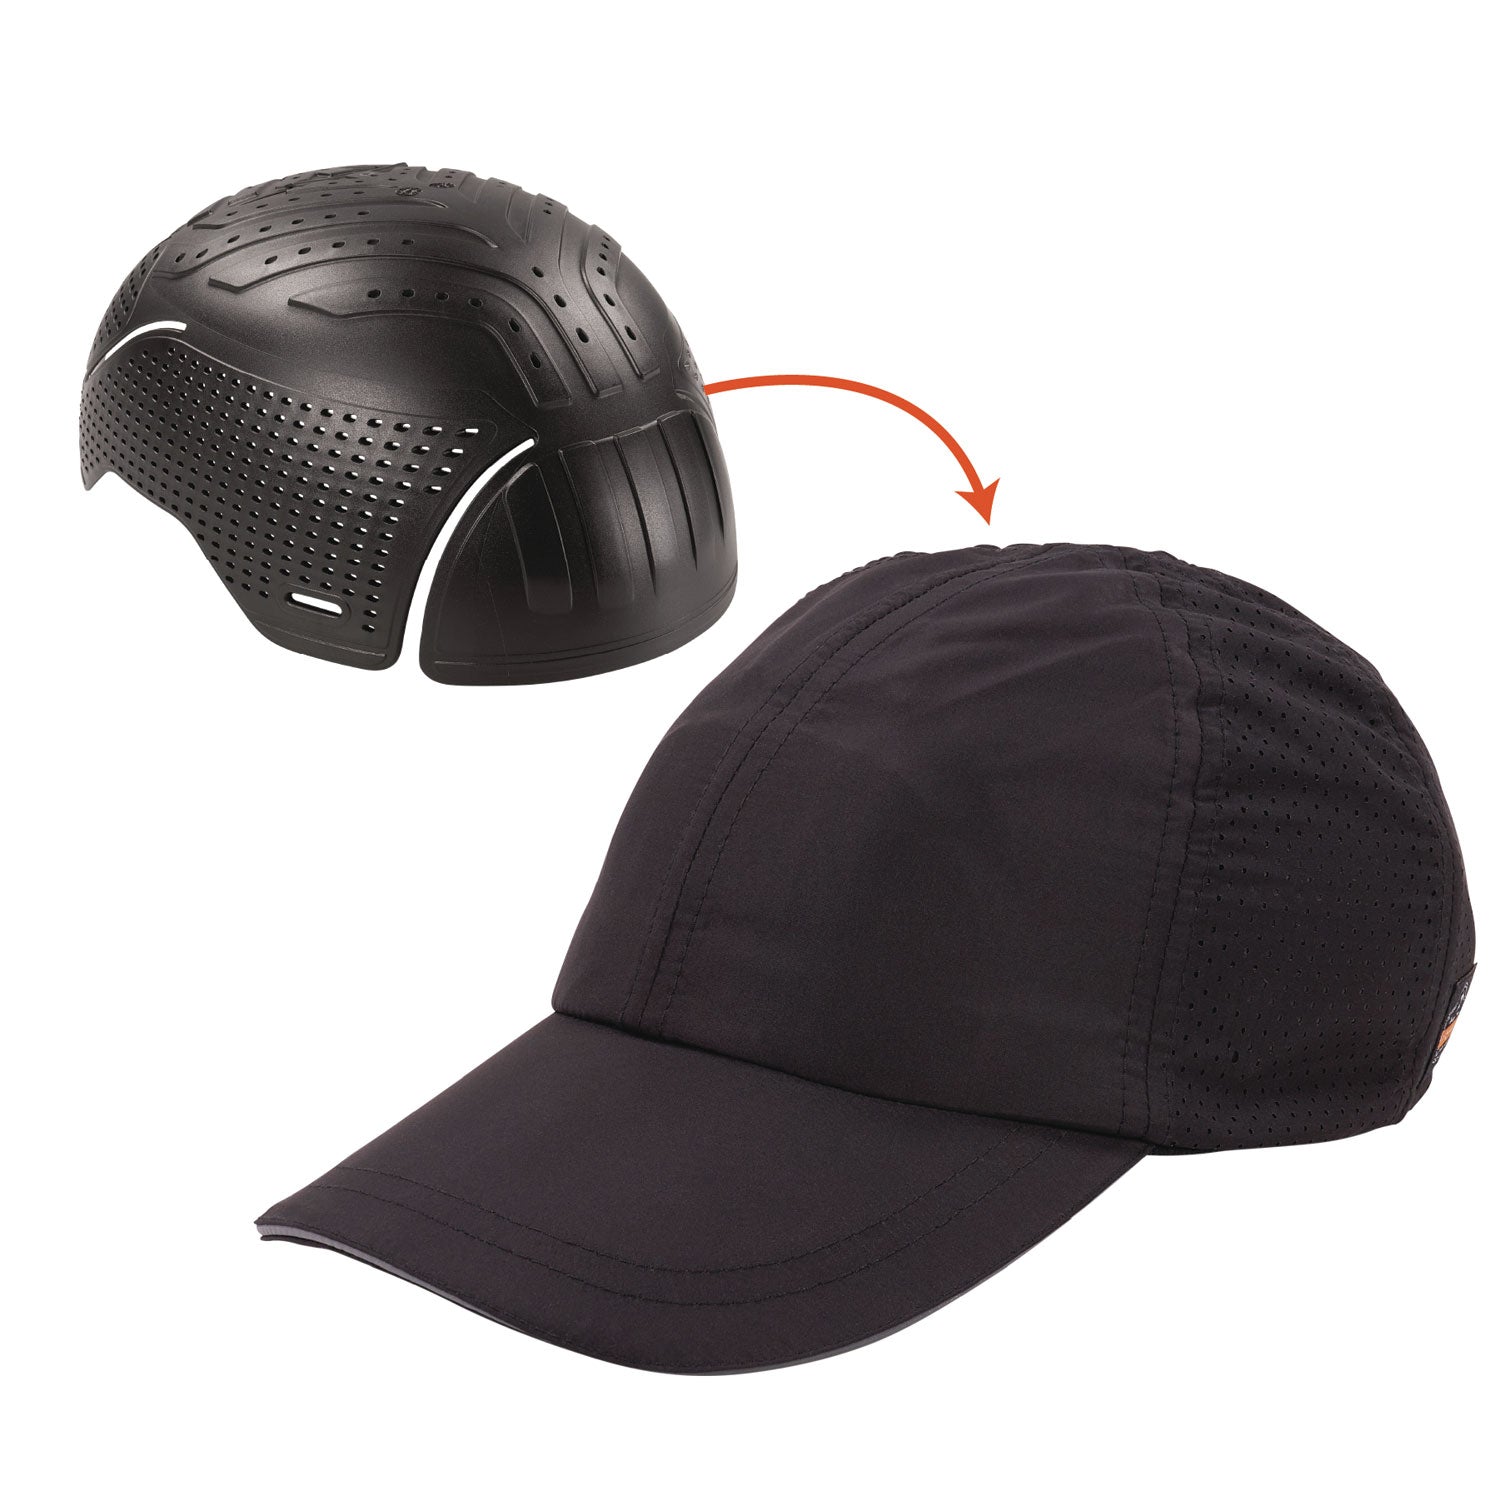 skullerz-8947-lightweight-baseball-hat-and-bump-cap-insert-x-small-small-black-ships-in-1-3-business-days_ego23450 - 1